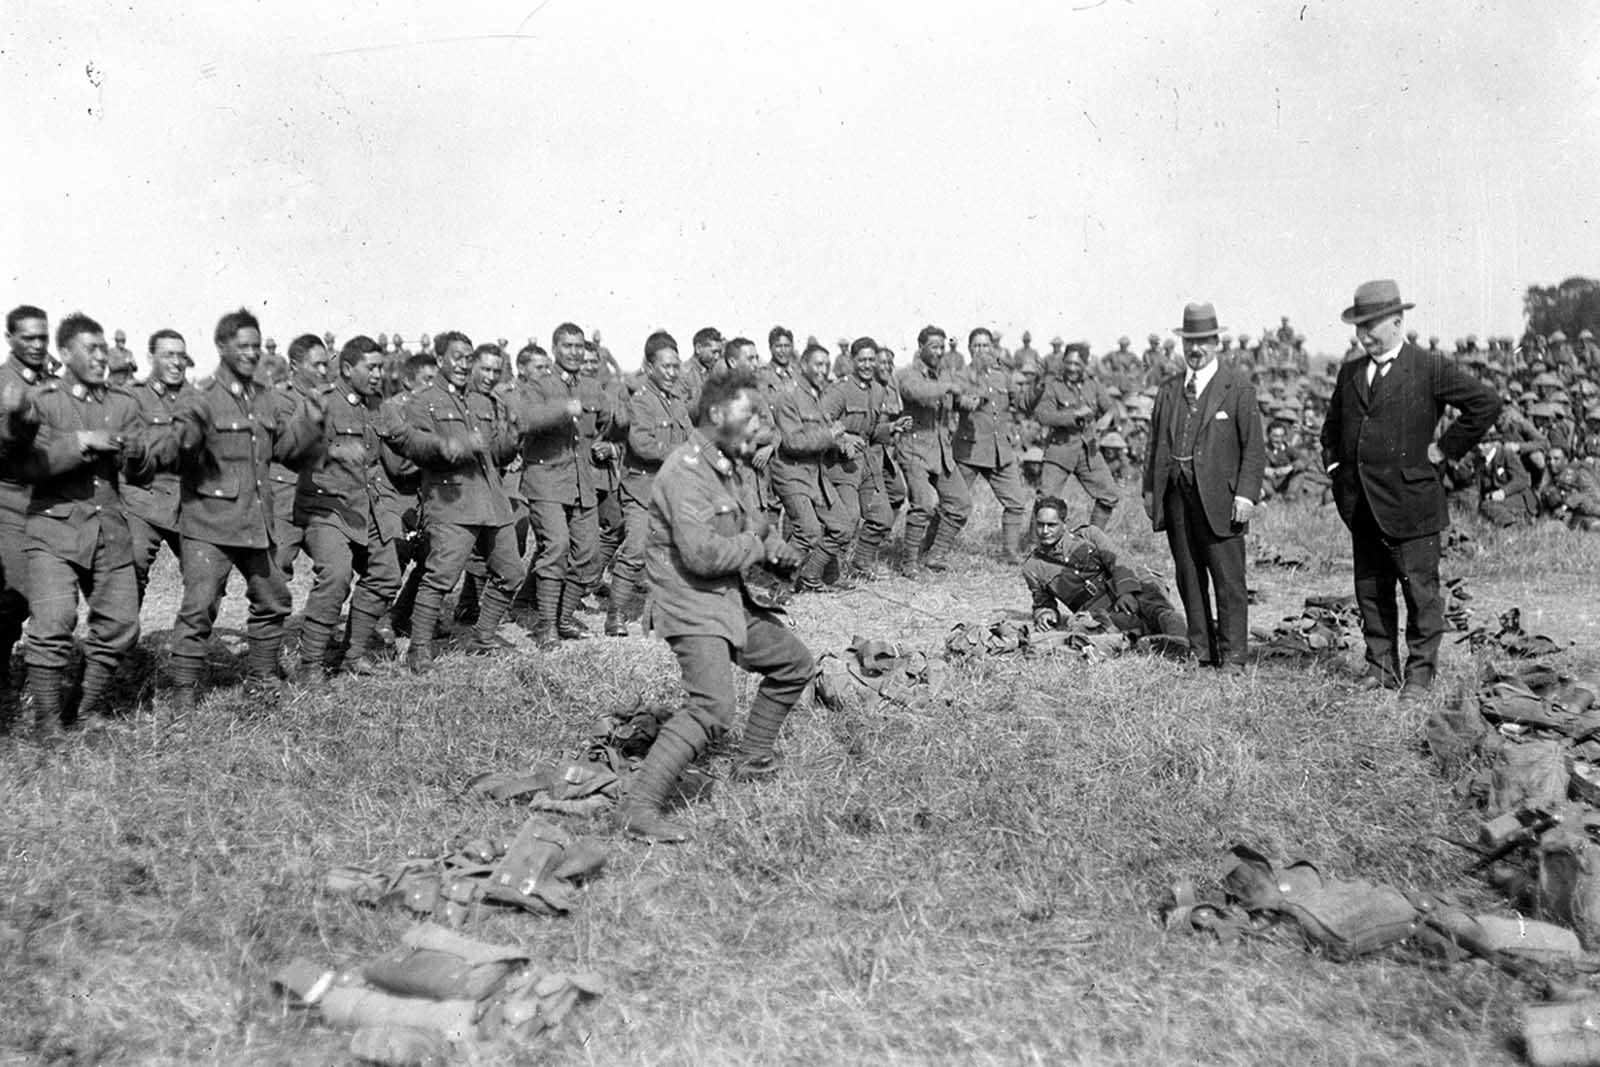 Members of New Zealand's Maori Pioneer Battalion perform a haka for New Zealand's Prime Minister William Massey and Deputy Prime Minister Sir Joseph Ward in Bois-de Warnimont, France, during World War I, on June 30, 1918. 